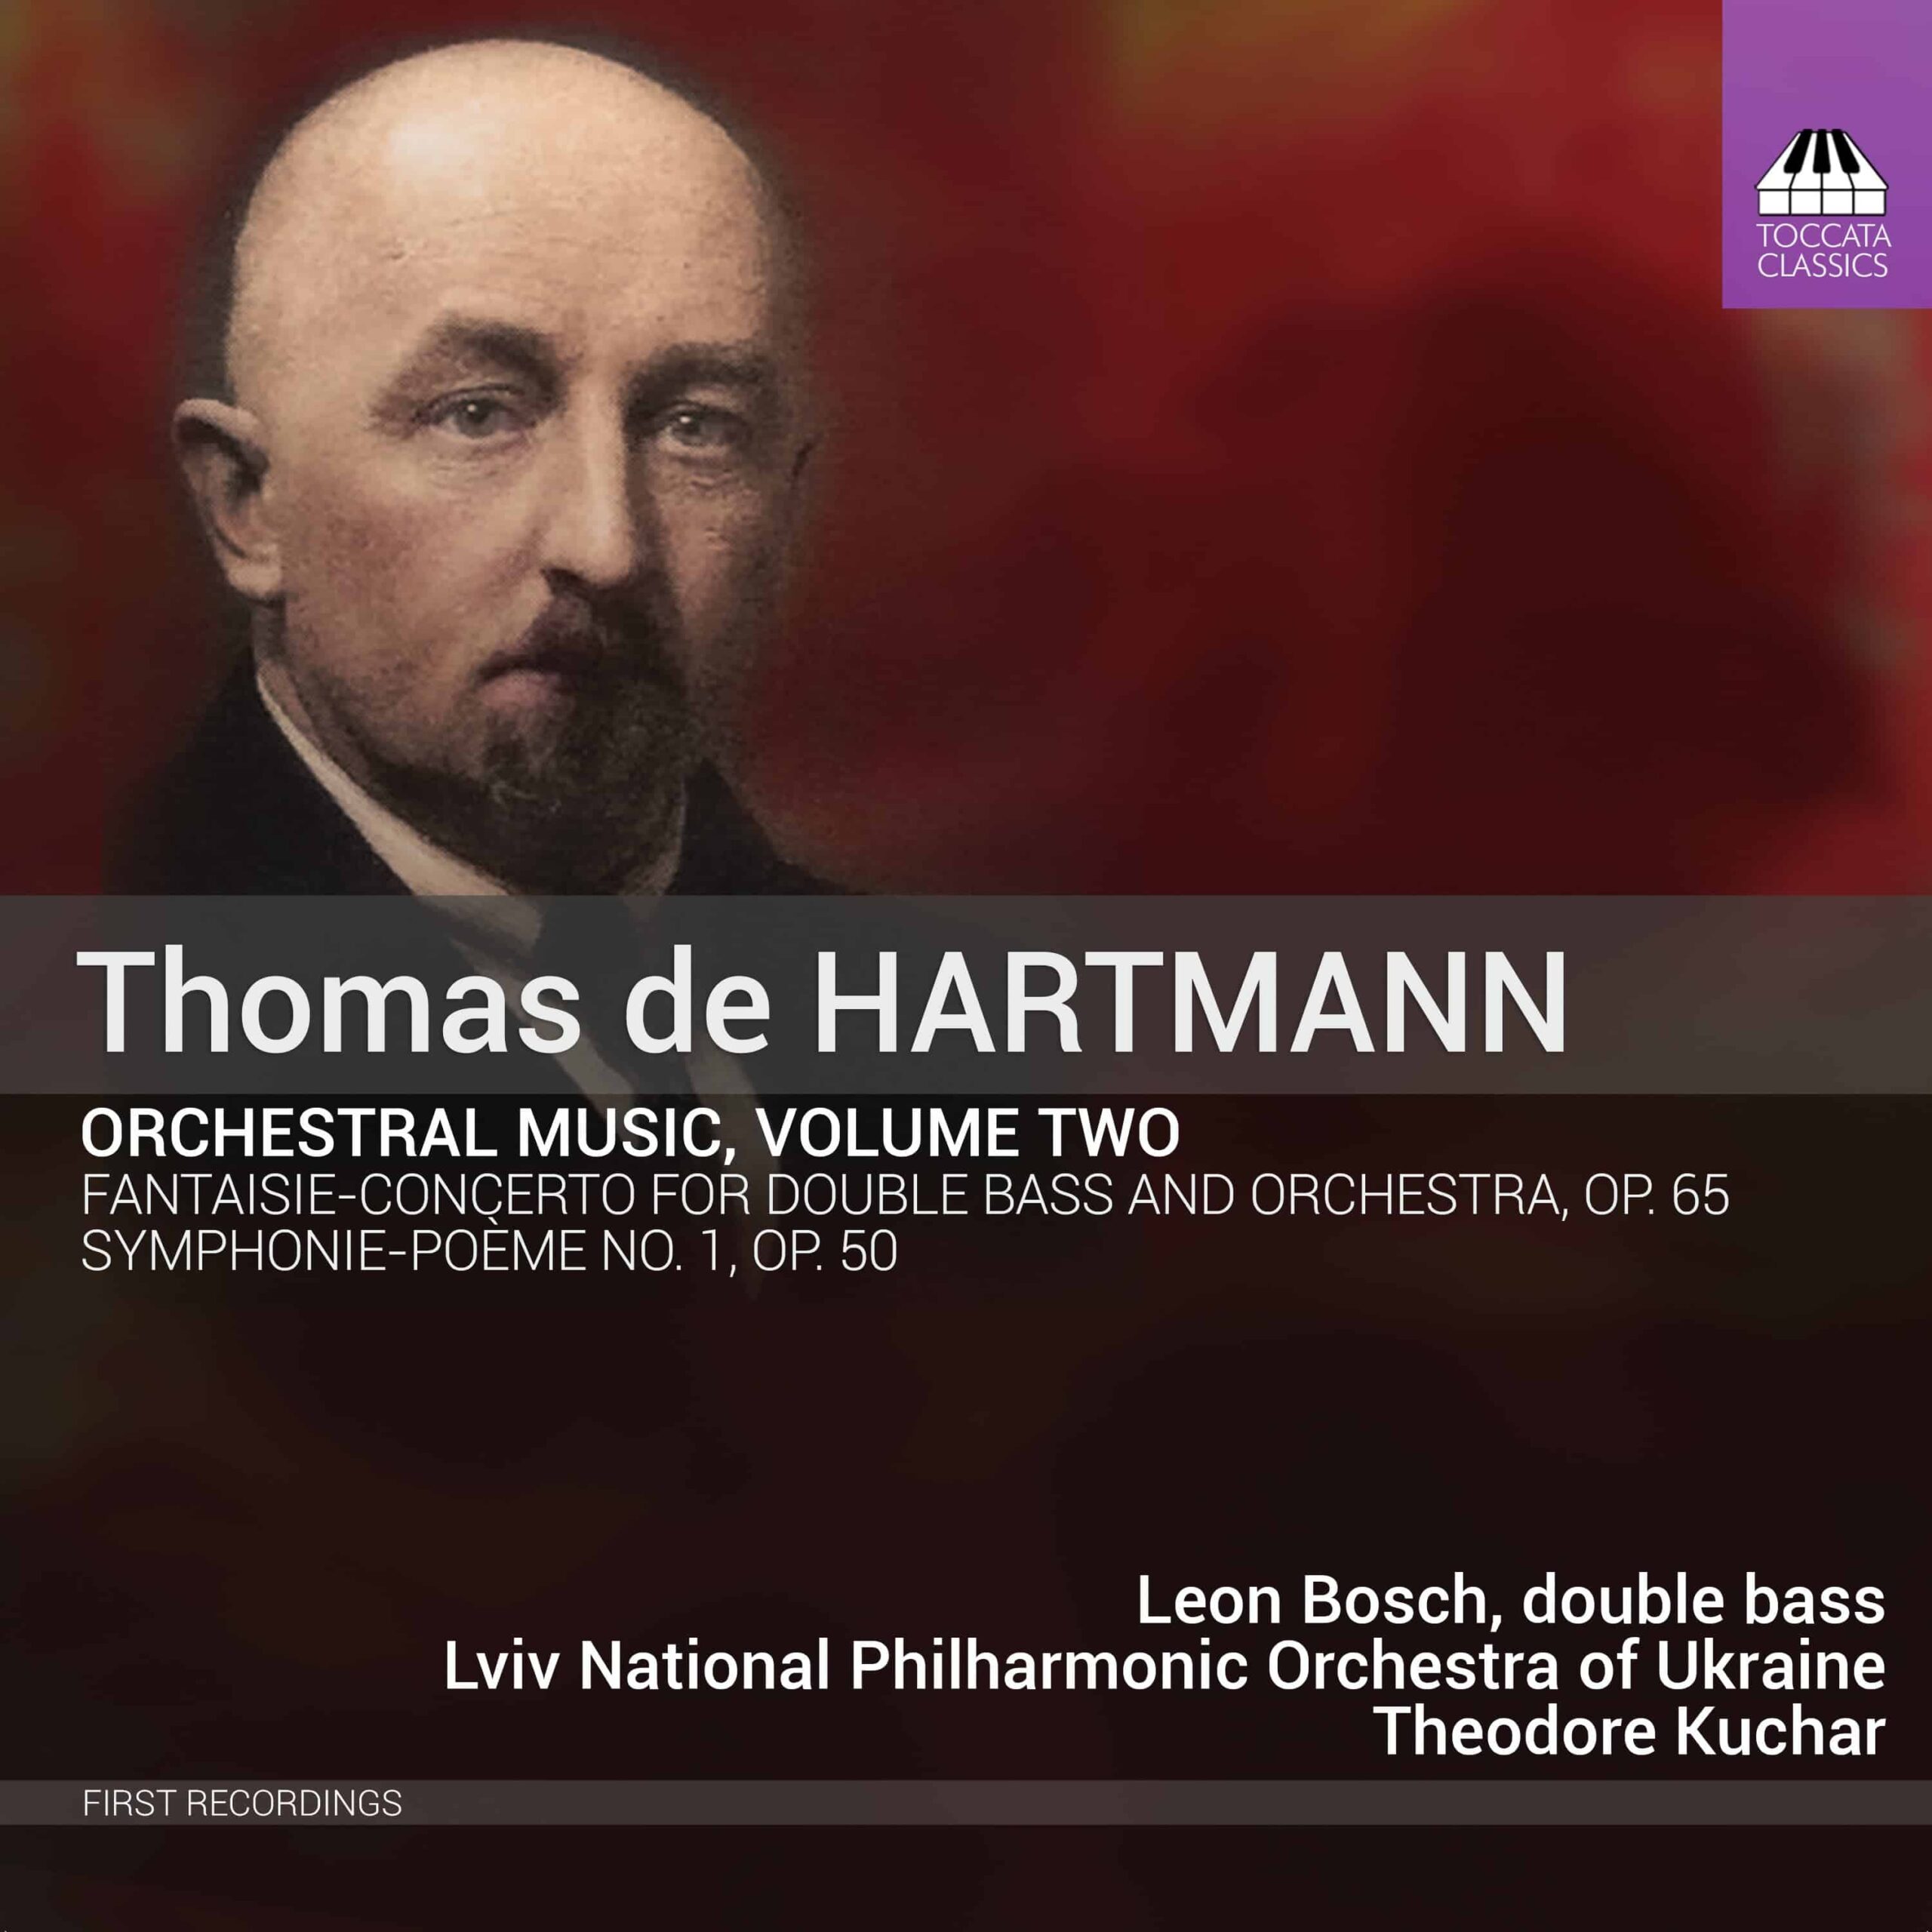 “Thomas de Hartmann: Orchestral Music, Volume Two,” is released on Nov 4, 2022 by Toccata Classics